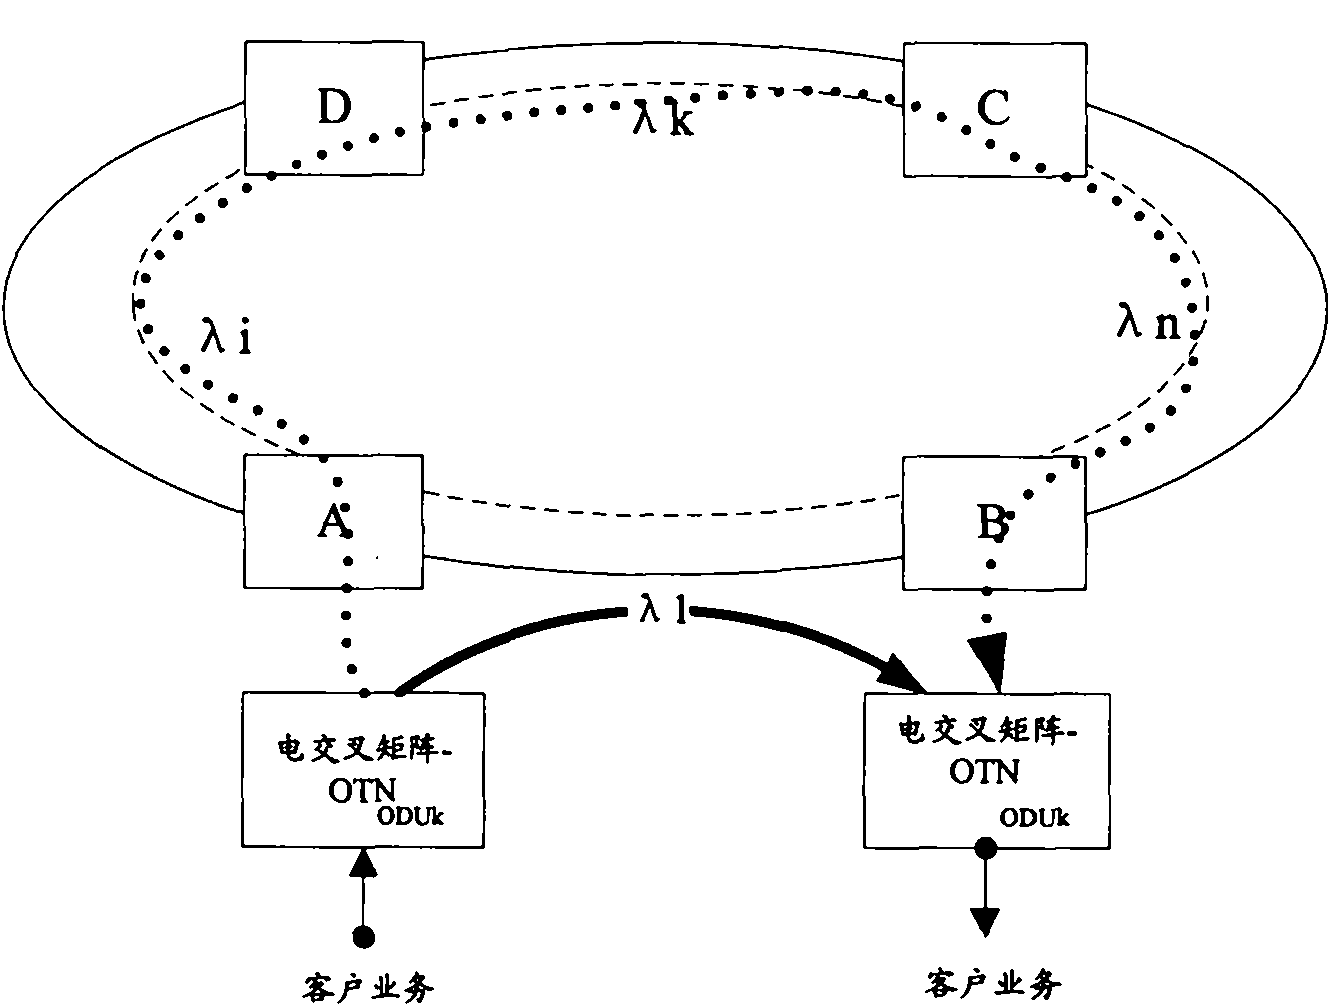 Shared protection control method and device of optical data unit (ODU) loop